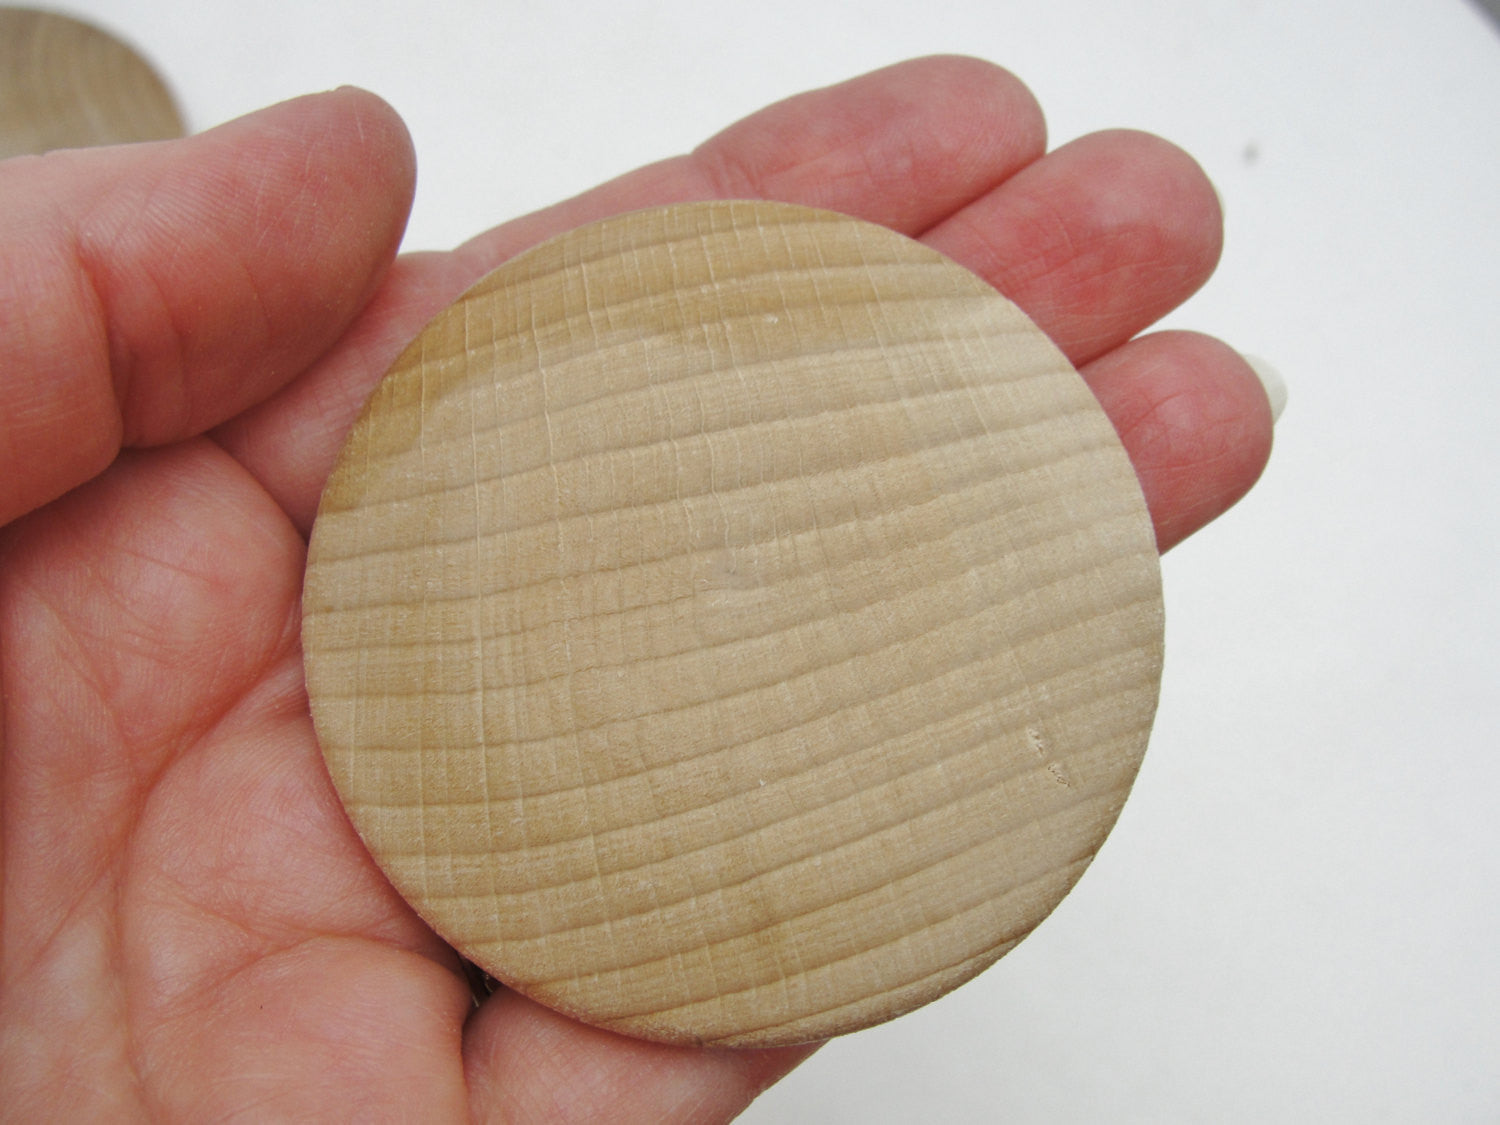 Large Wooden domed disc 2 1/4" wide x 5/16" thick set of 12 - Wood parts - Craft Supply House